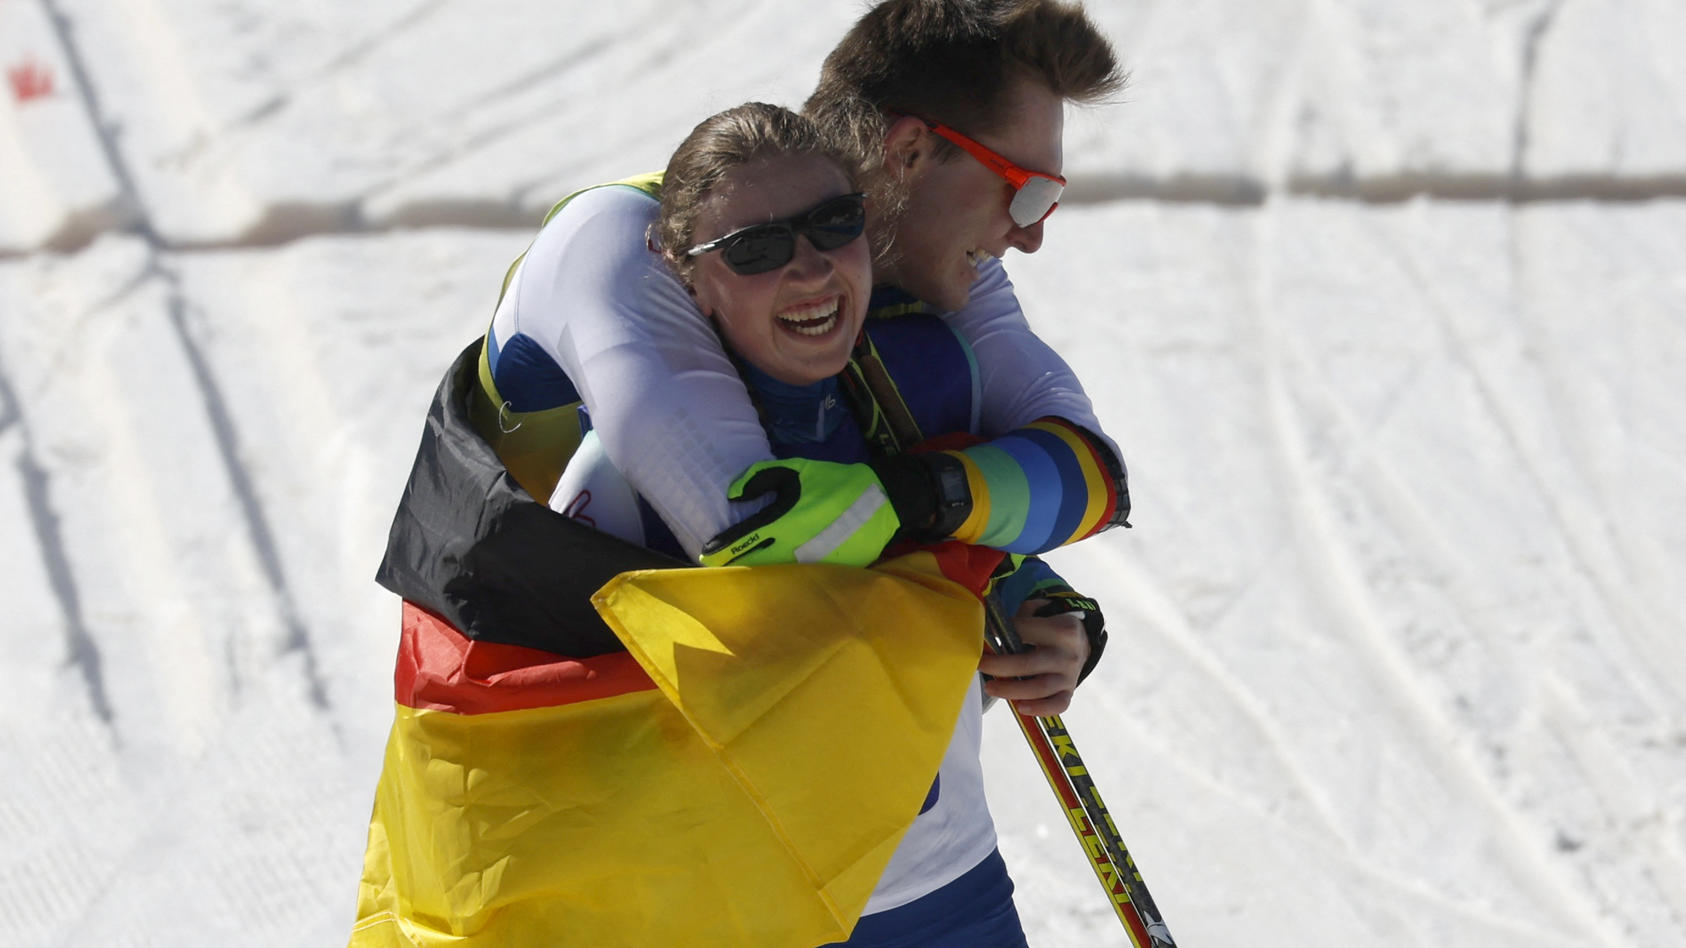 Beijing 2022 Winter Paralympic Games - Para Biathlon - Women's Middle Distance Vision Impaired - National Biathlon Centre, Zhangjiakou, China - March 8, 2022. Leonie Maria Walter of Germany celebrates with guide Pirmin Strecker of Germany after compe